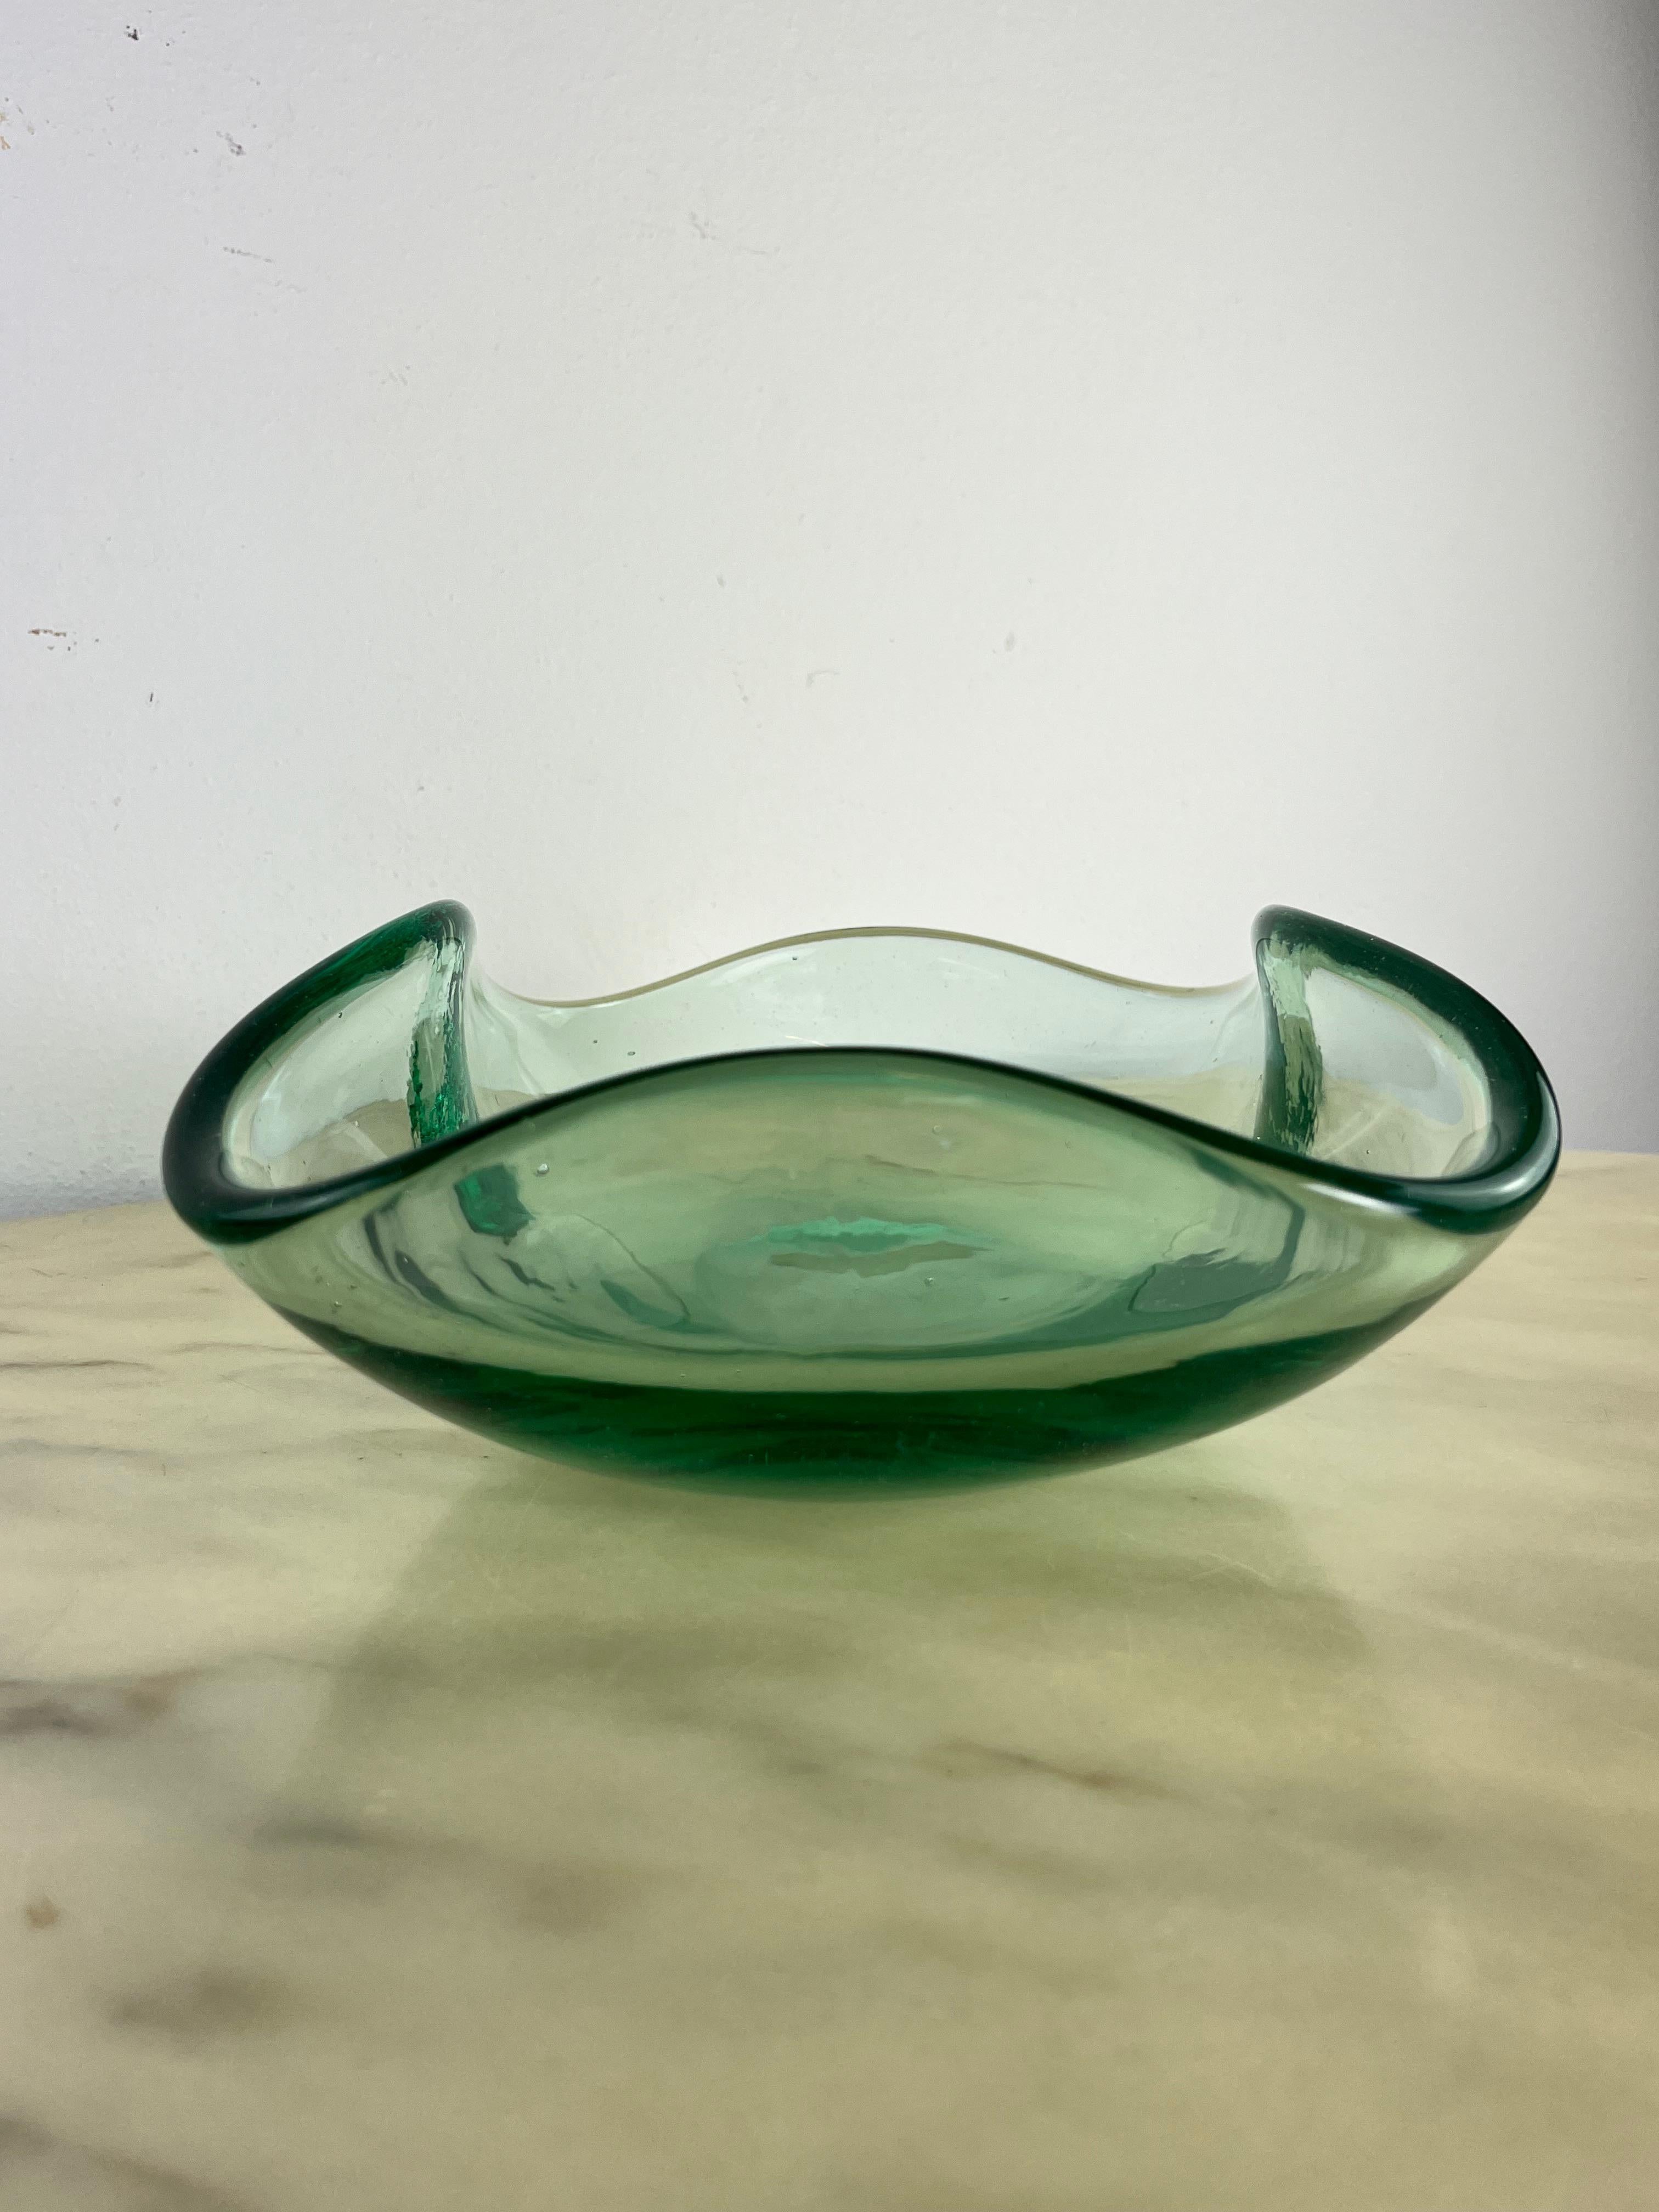 Mid-Century Murano glass centerpiece attributed to Max Ingrand for Fontana Arte 1960s
It was purchased in Venice by the grandfather of a friend of mine.
Intact and in good condition. Small bubbles can be glimpsed inside the glass, typical of